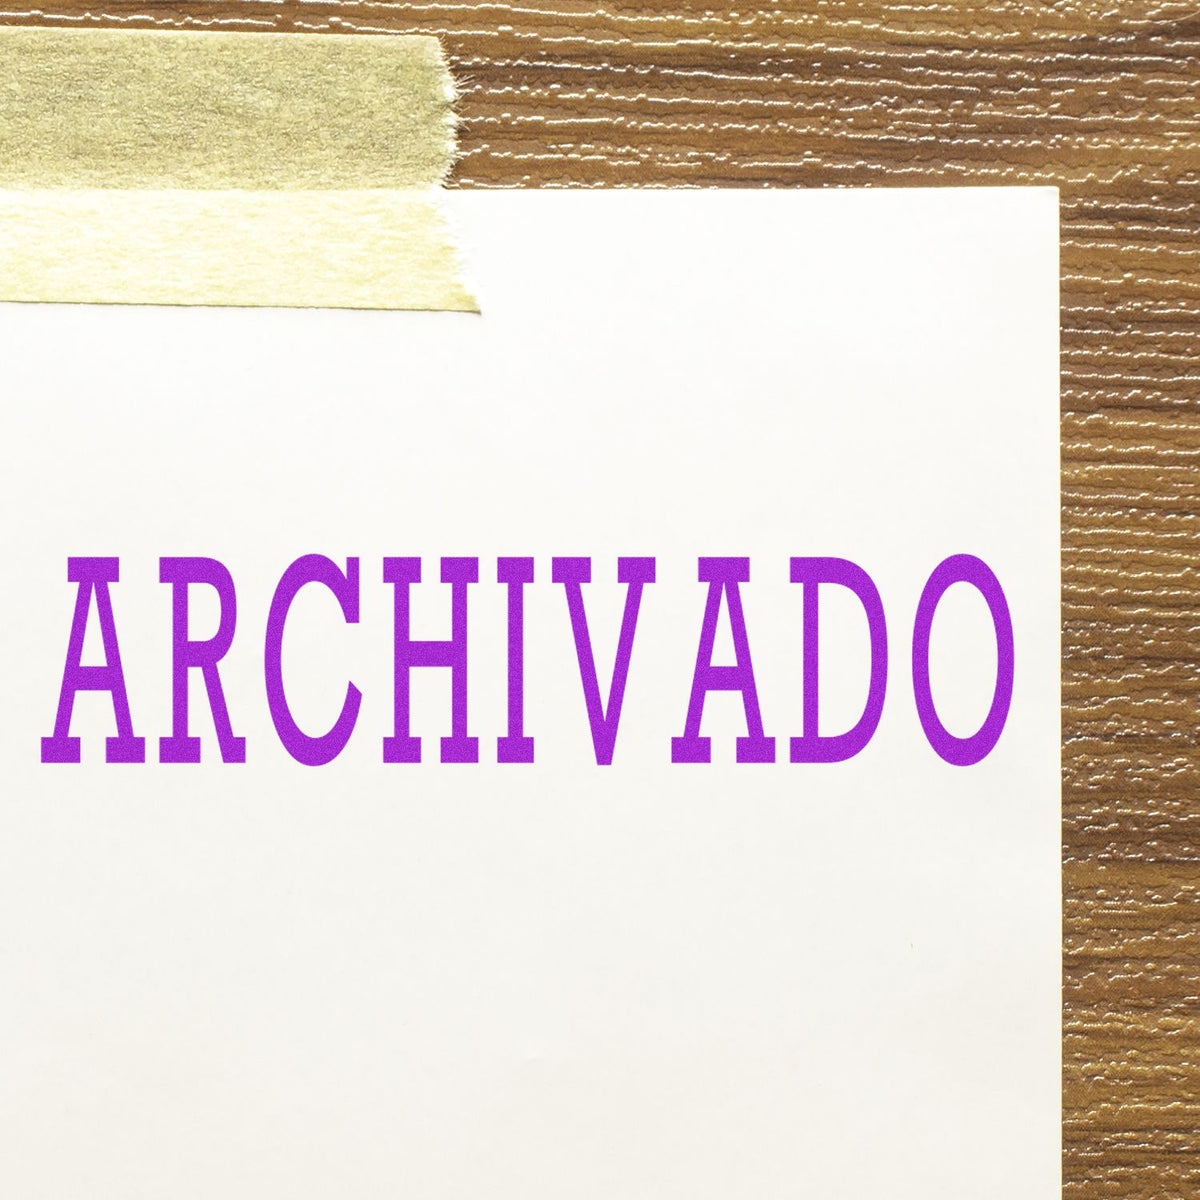 Archivado Rubber Stamp In Use